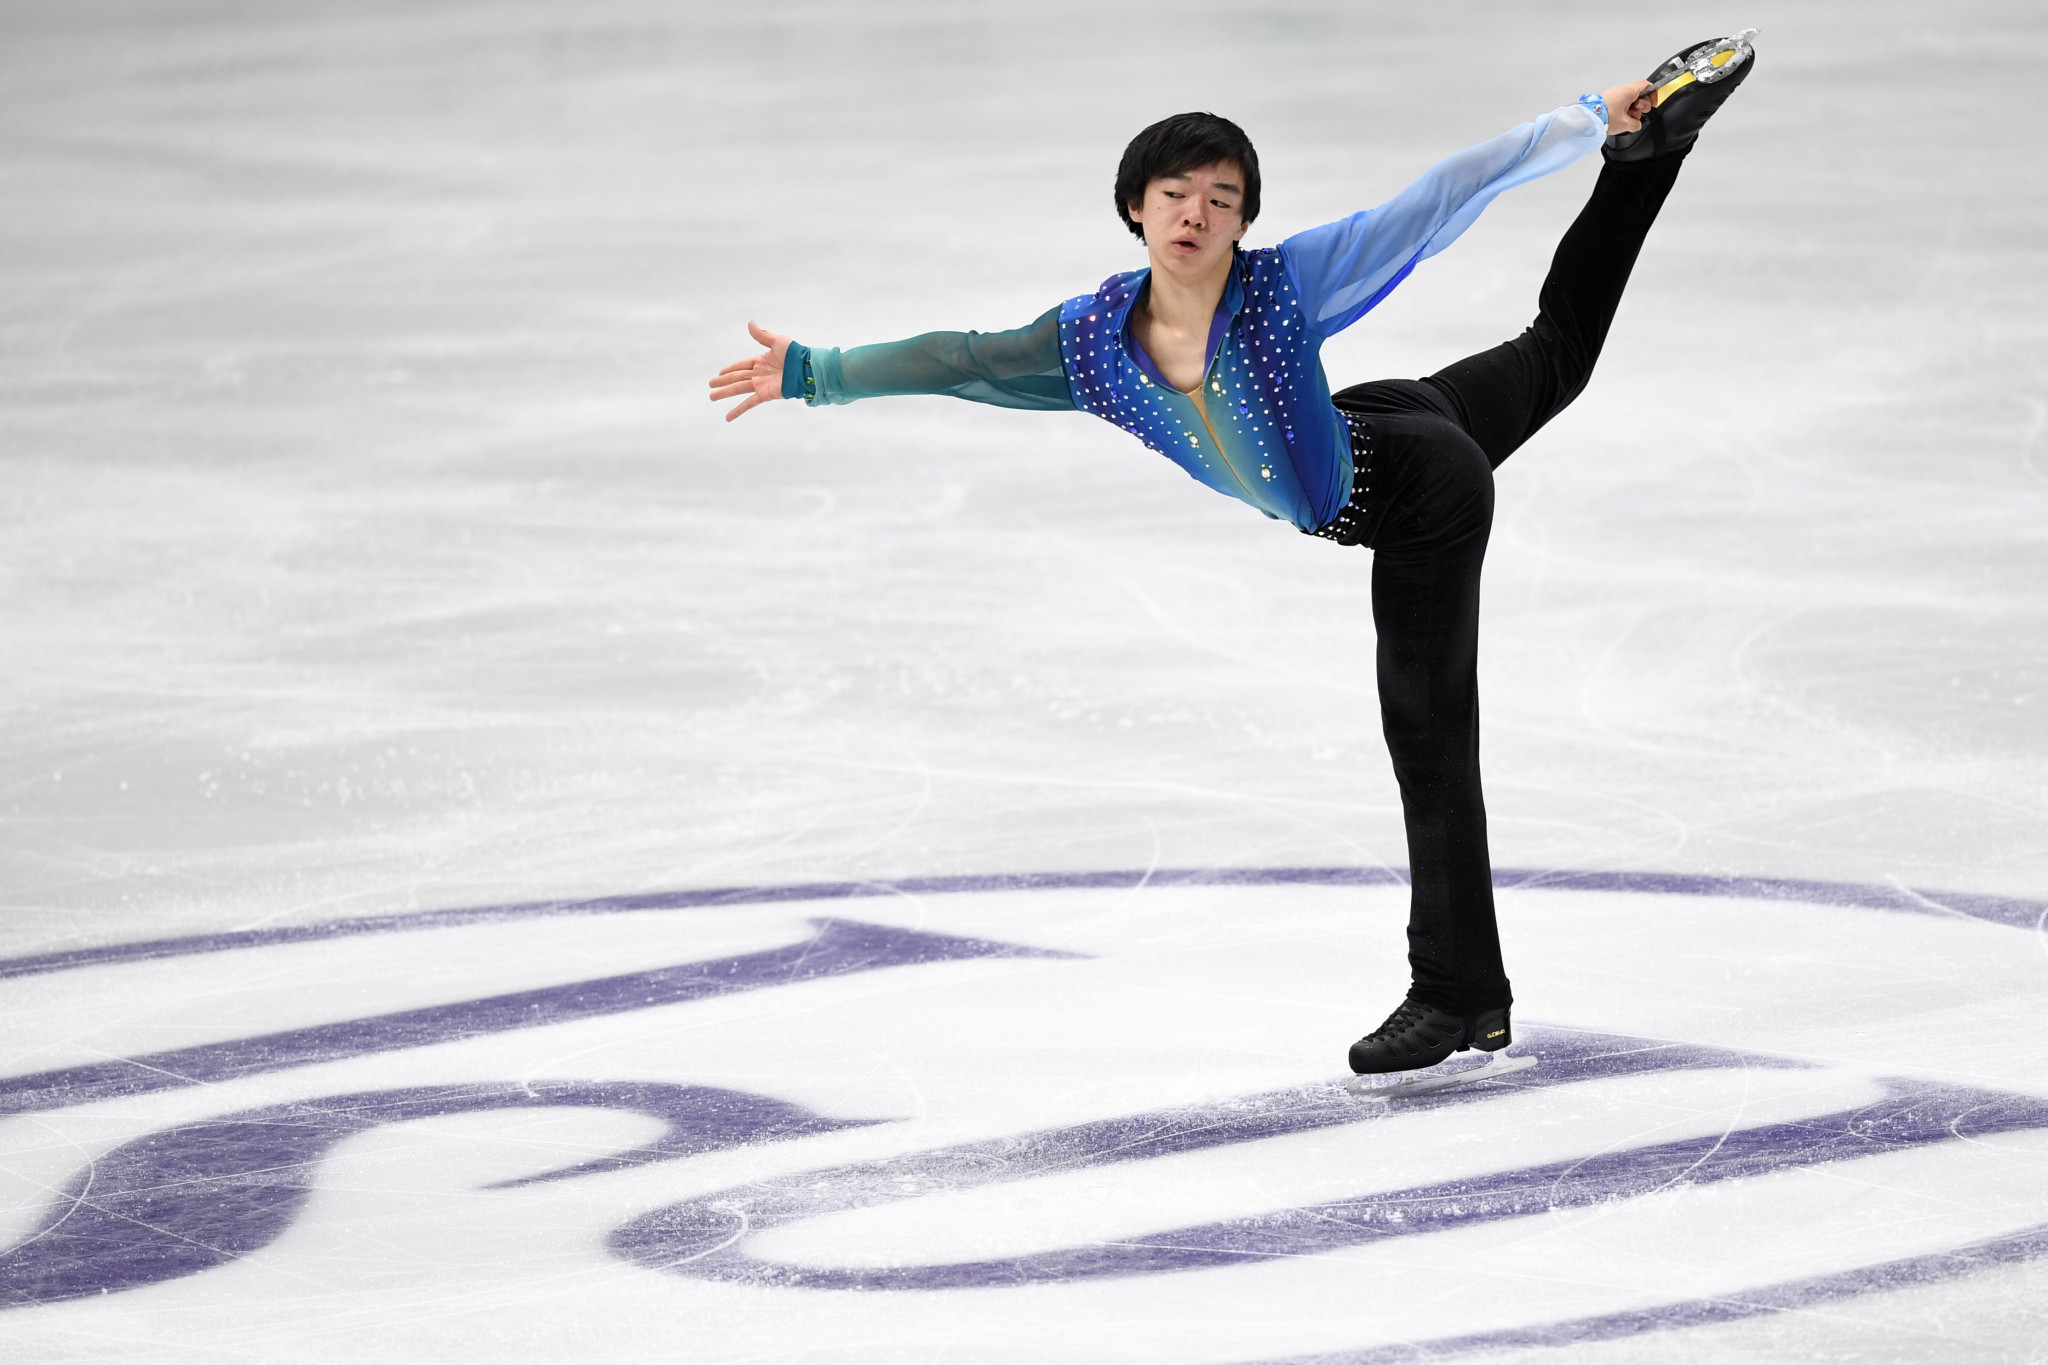 Winter Youth Olympic Games champion Yuma Kagiyama leads the men's competition at the ISU World Junior Figure Skating Championships ©Getty Images